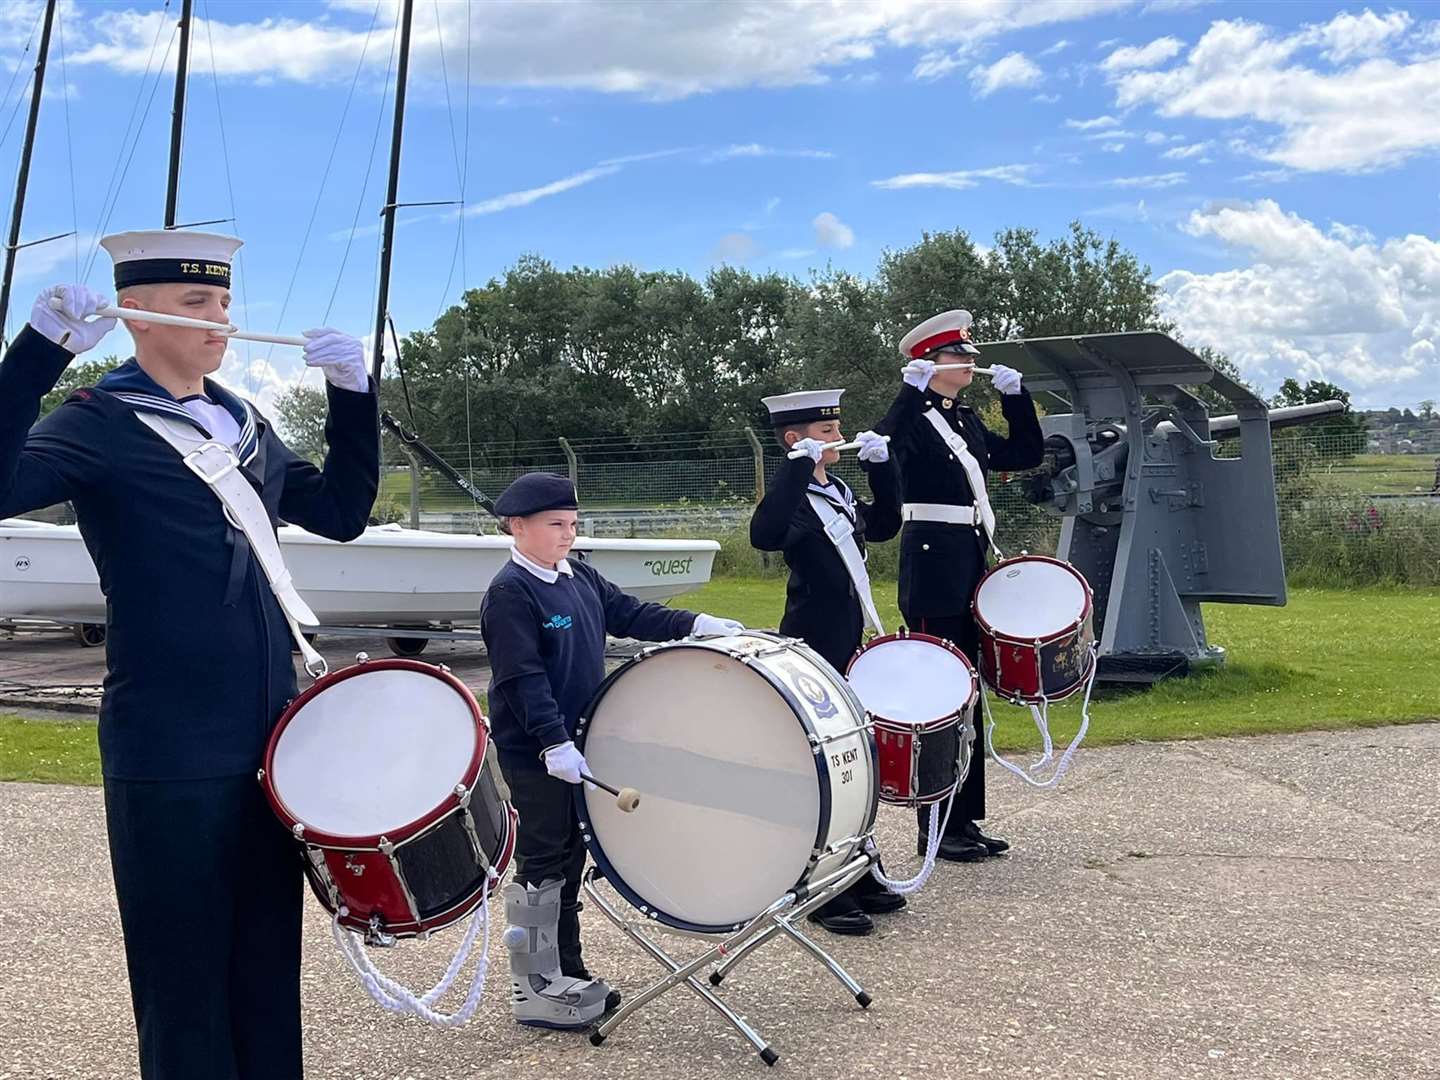 Drumming up support: Sheppey Sea Cadets at their headquarters at Barton's Point, Sheerness